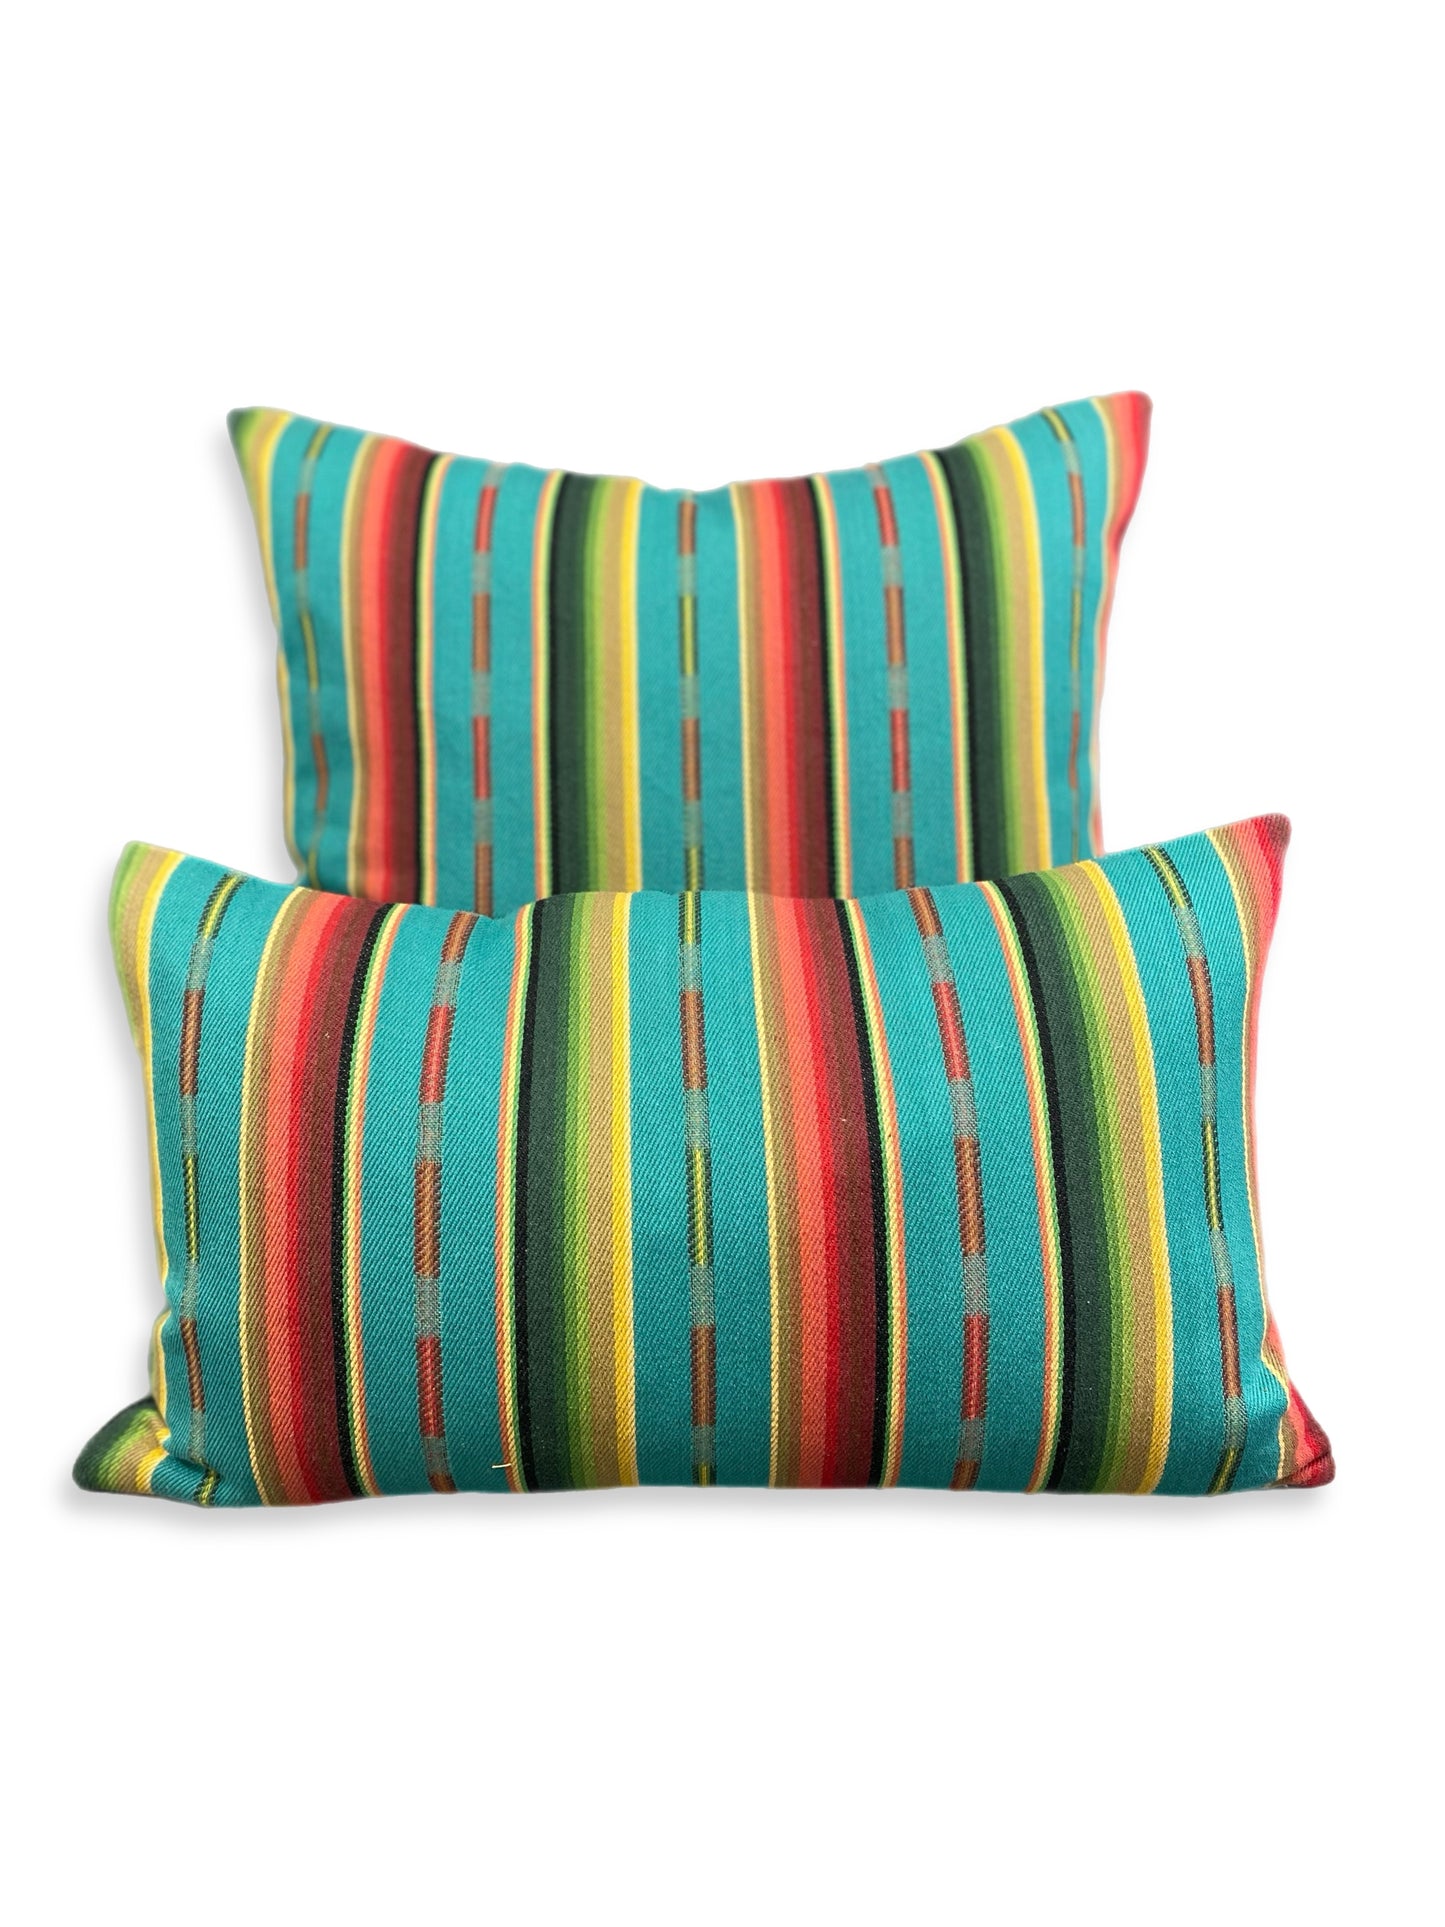 Luxury Lumbar Pillow - 24" x 14" - Native-Turquoise; beautiful woven stripes of turquoise, black, oranges, yellows, greens, blues, and reds